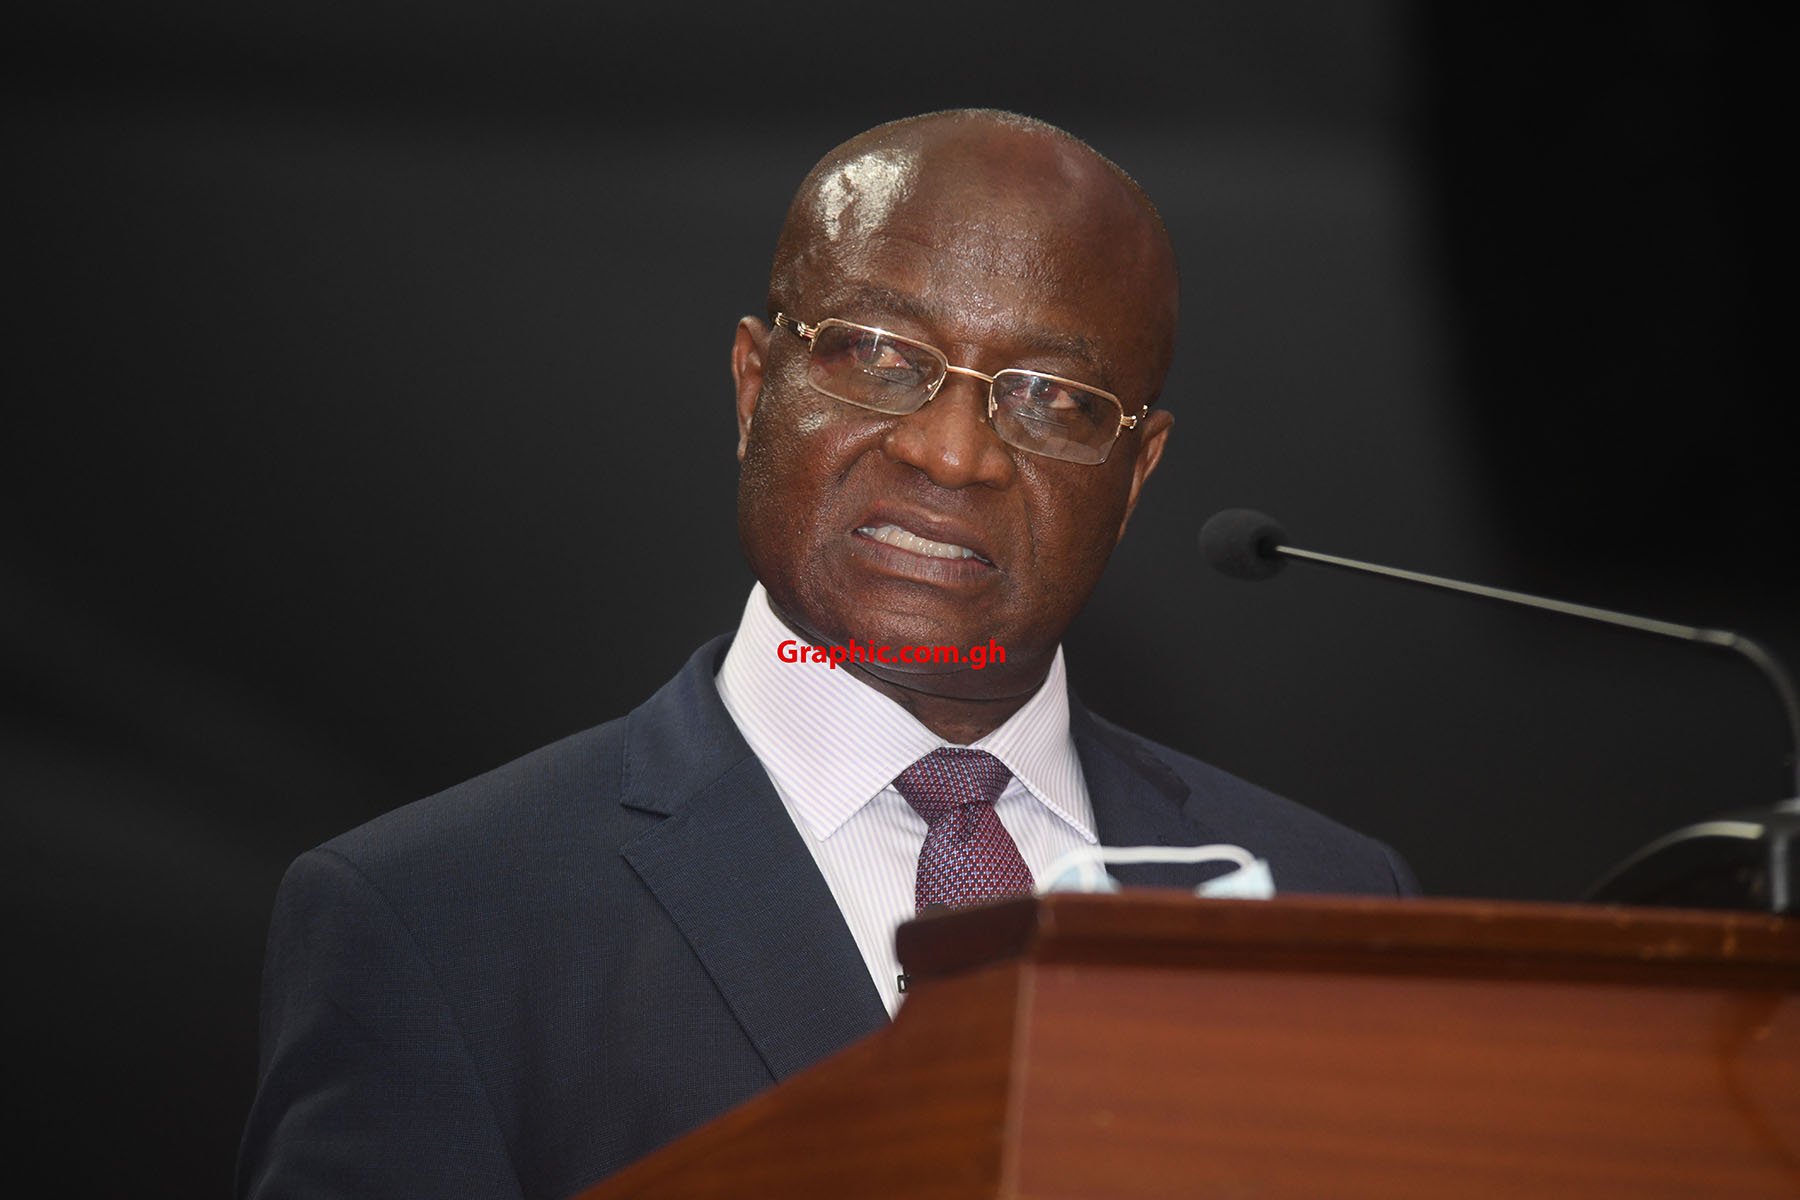 Government to secure 20 million new vaccines - Mensah Bonsu